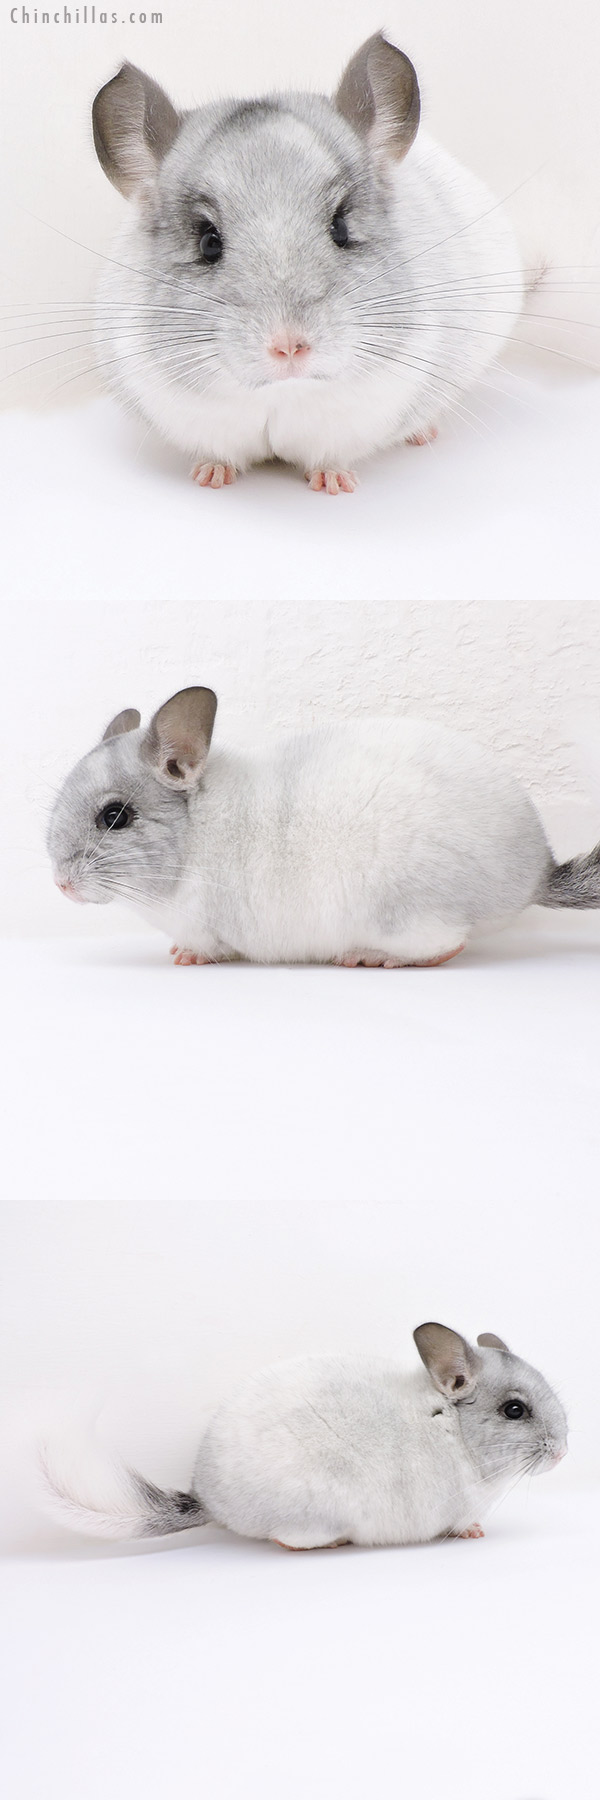 Chinchilla or related item offered for sale or export on Chinchillas.com - 19031 Brevi Type Herd Improvement Quality White Mosaic Male Chinchilla